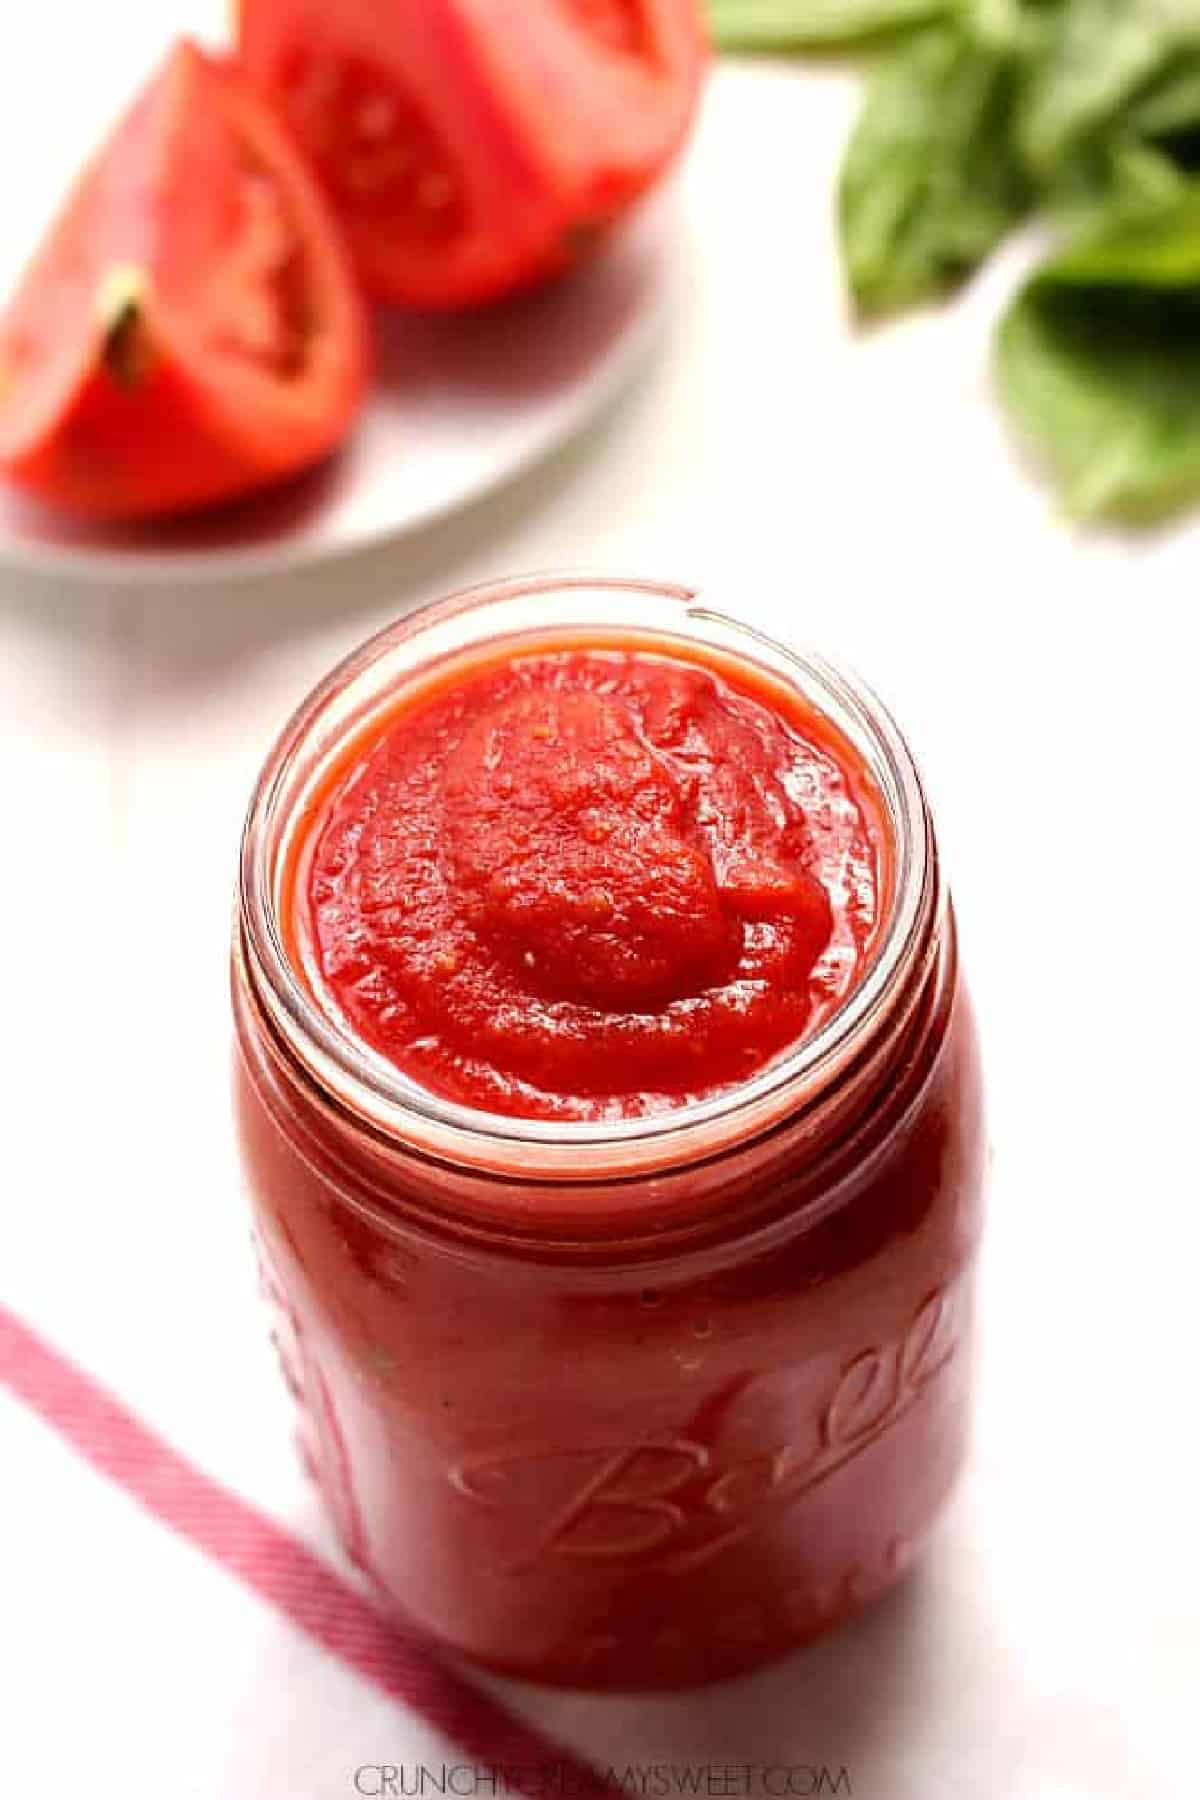 Tomato sauce in a glass jar on a white board.